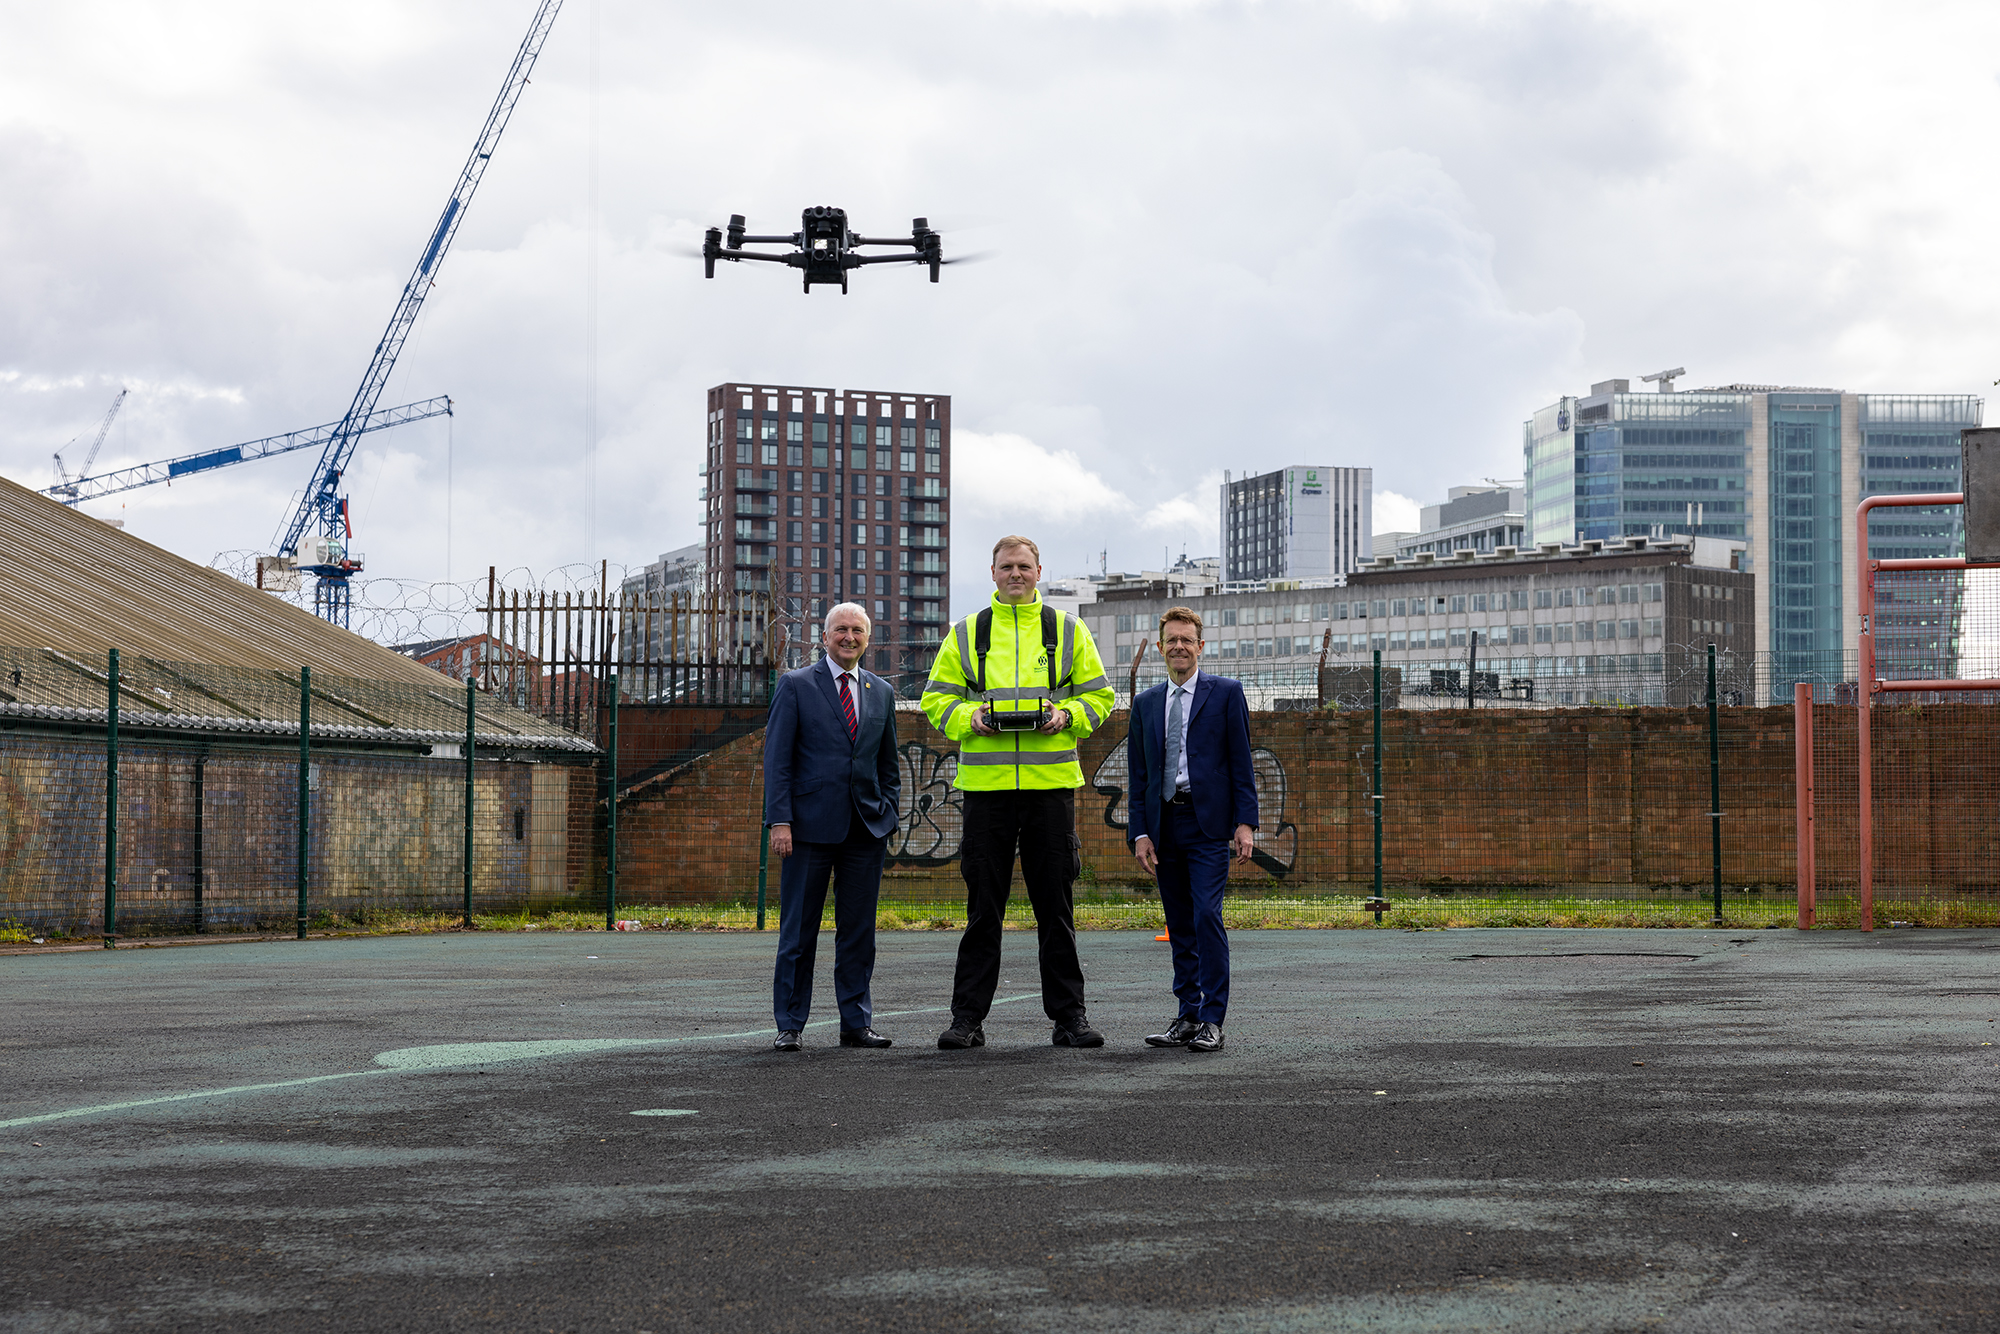 Image caption: Cllr Ian Ward, drone pilot and Andy Street, Mayor of the West Midlands and chair of the WMCA.